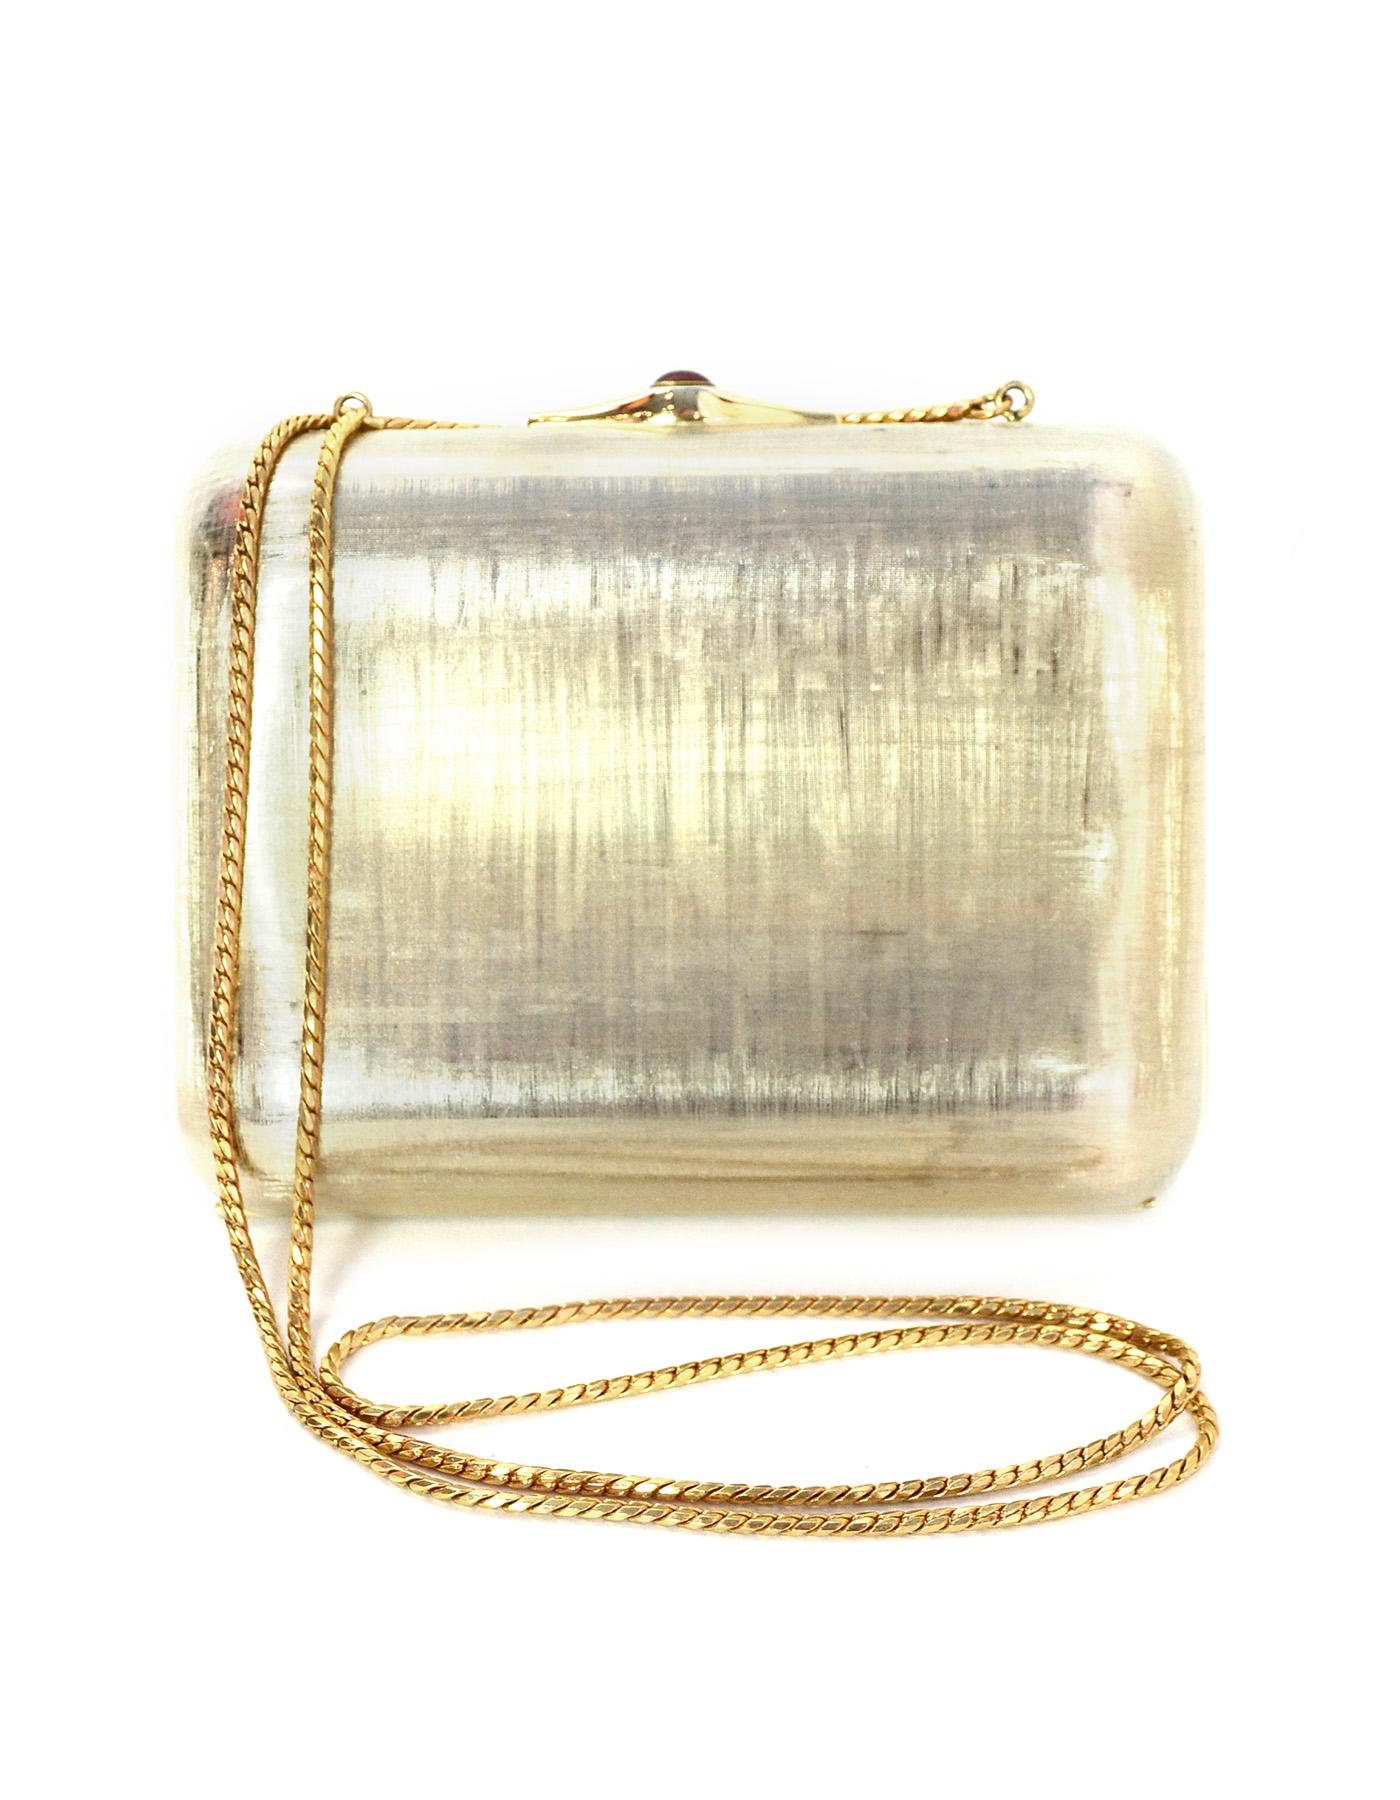 Judith Leiber Gold Minaudiere Clutch Bag w. Stone Closure & Chain Strap  In Excellent Condition In New York, NY